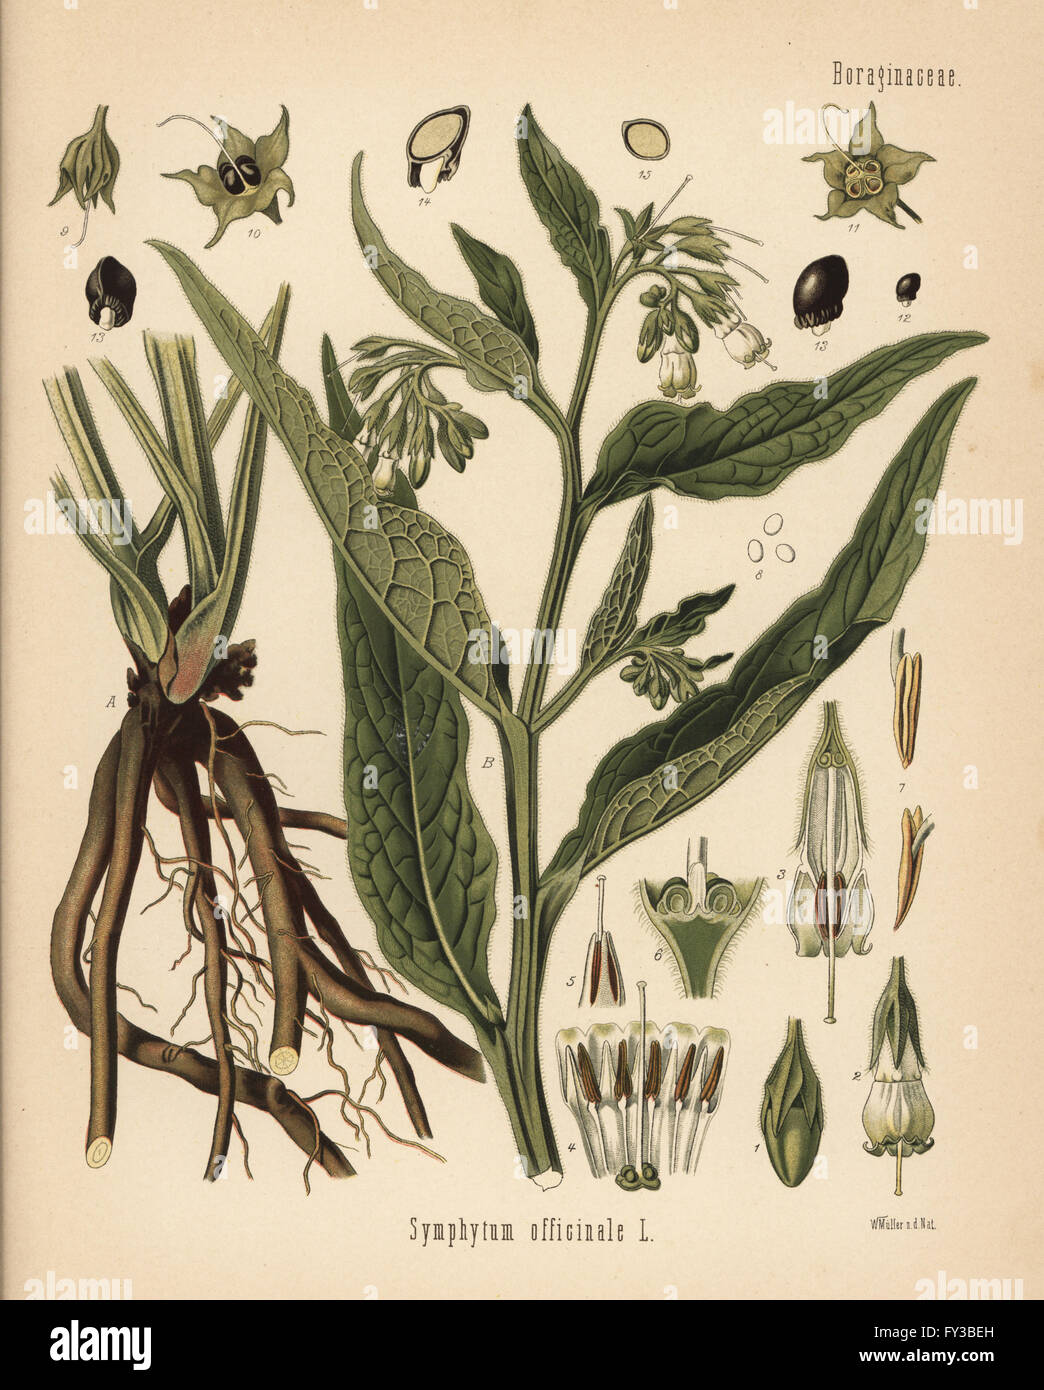 Comfrey, Symphytum officinale. Chromolithograph after a botanical illustration by Walther Muller from Hermann Adolph Koehler's Medicinal Plants, edited by Gustav Pabst, Koehler, Germany, 1887. Stock Photo